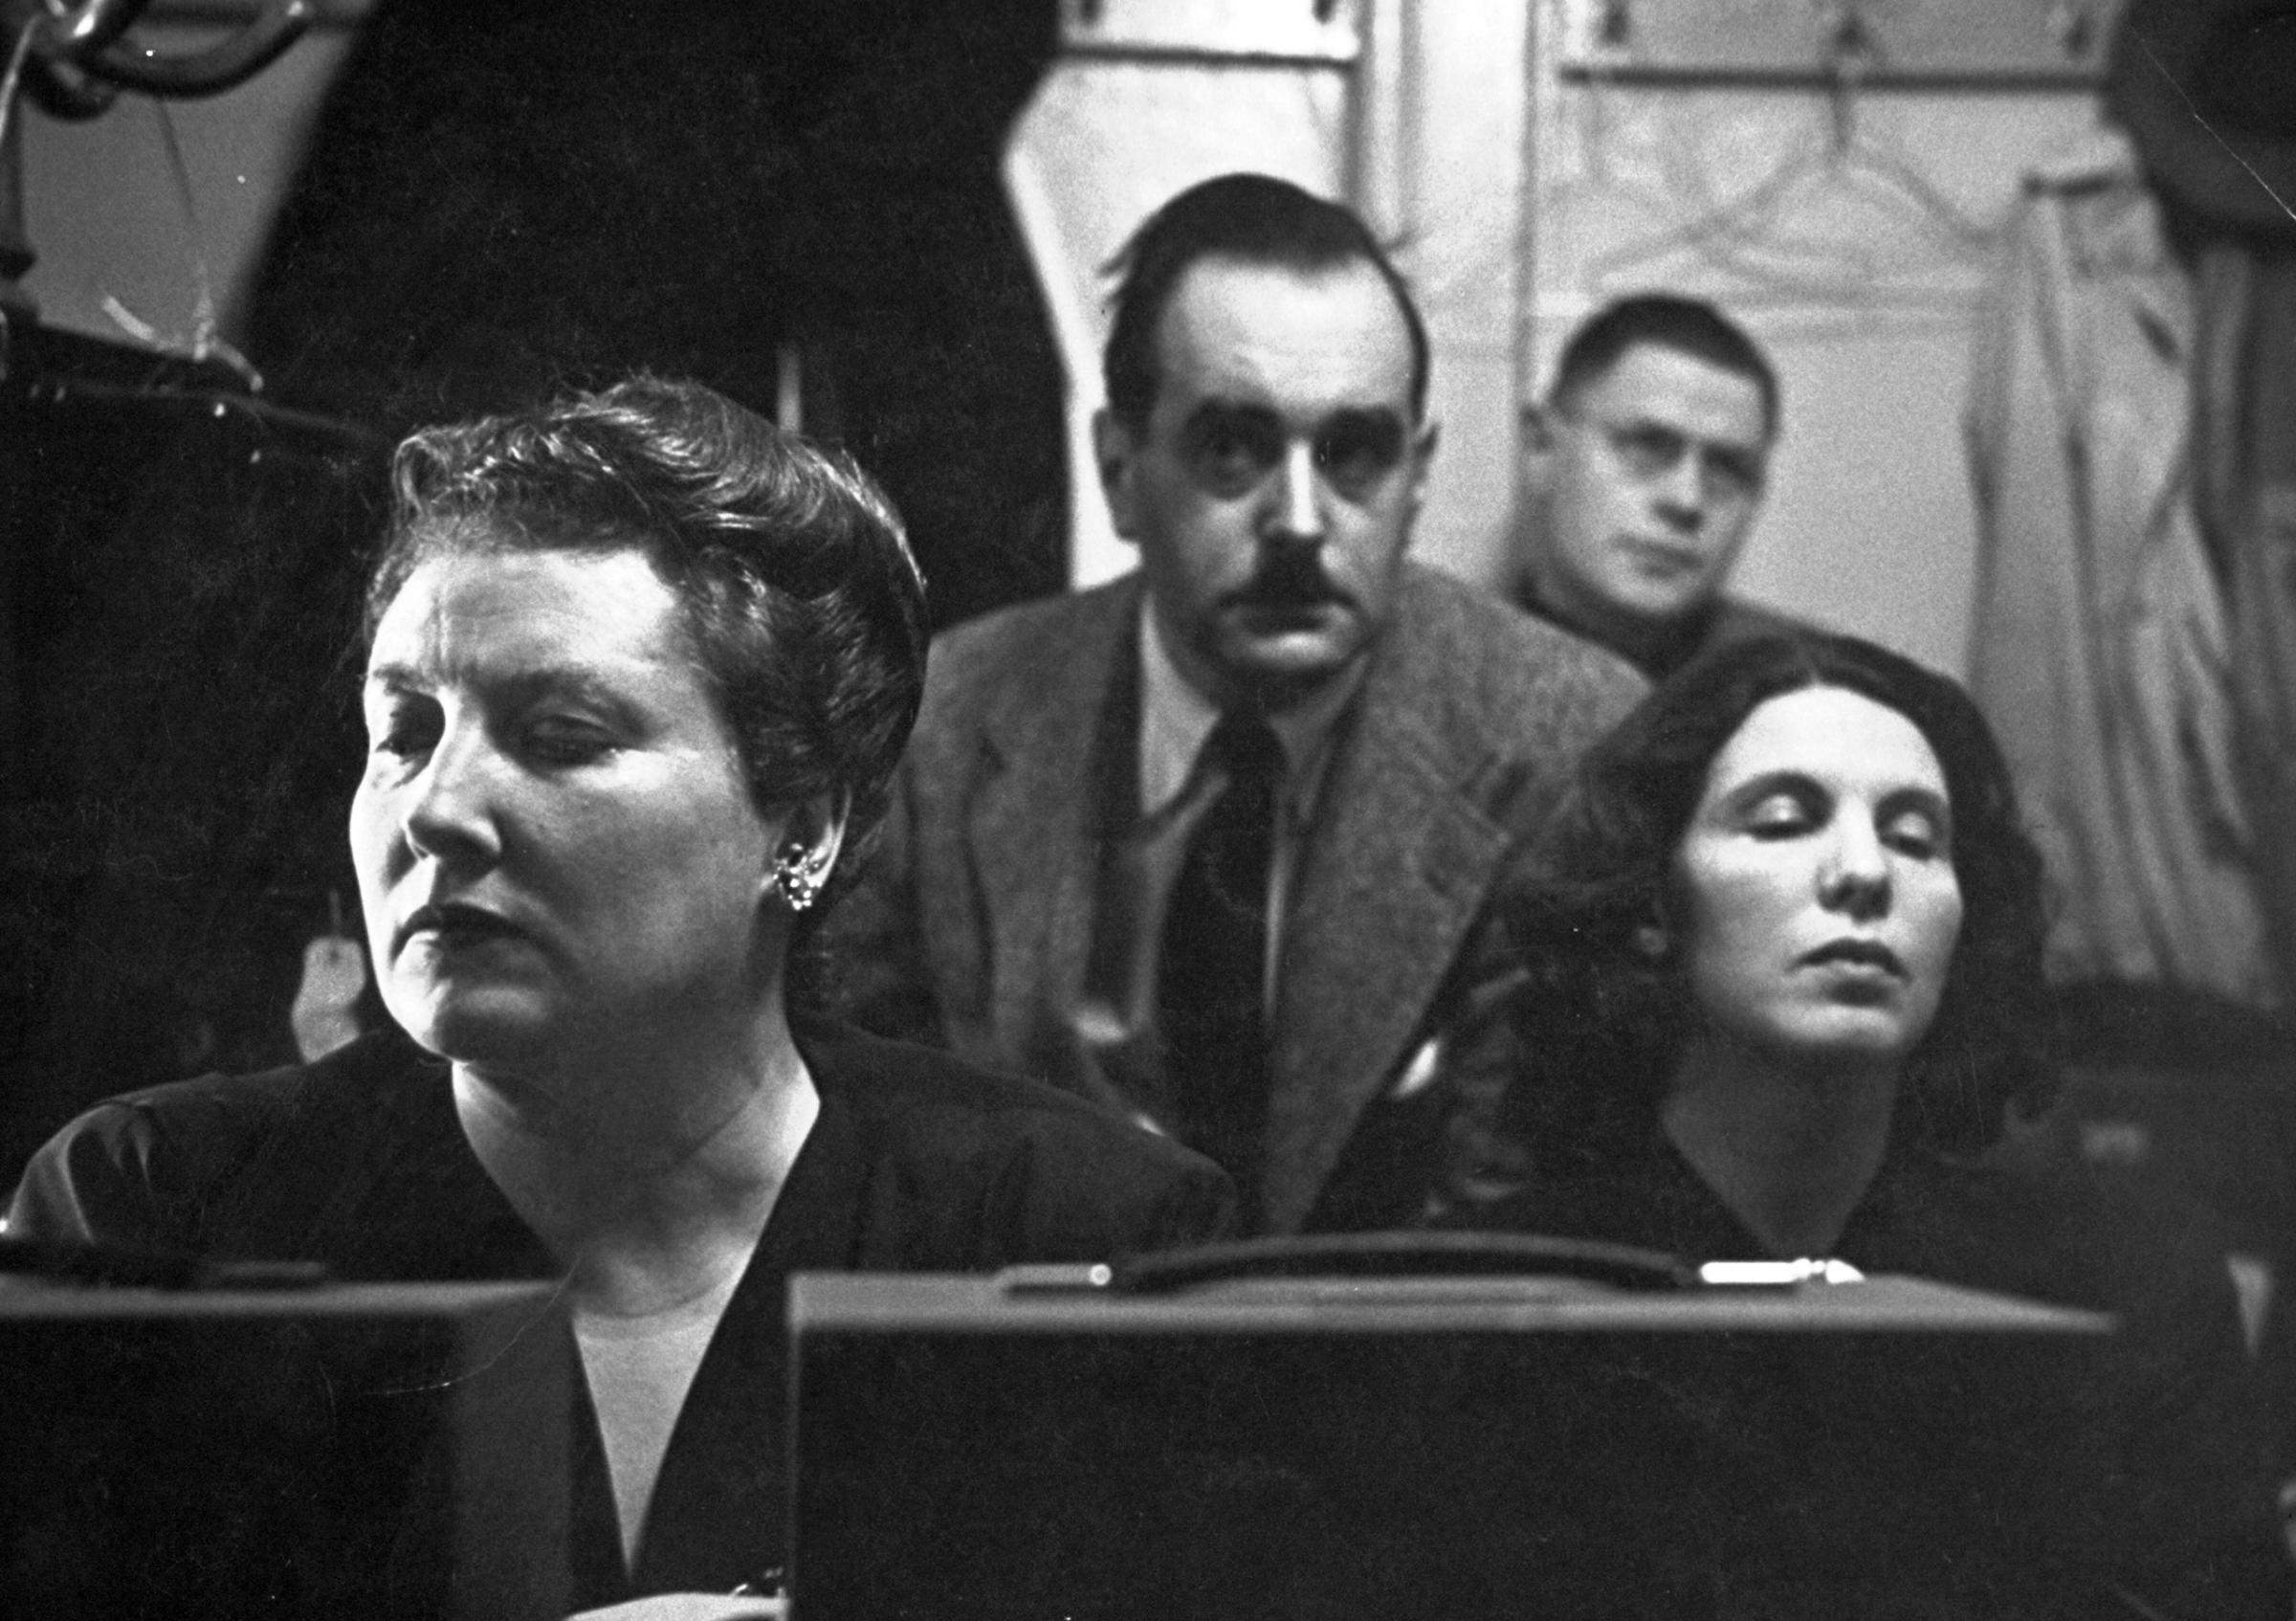 Eyes closed and their faces mask-like in deep reverie, Helen Traubel (left) and Herta Glaz (right) sit in recording booth with sound engineers listening to their duet from Tristan.